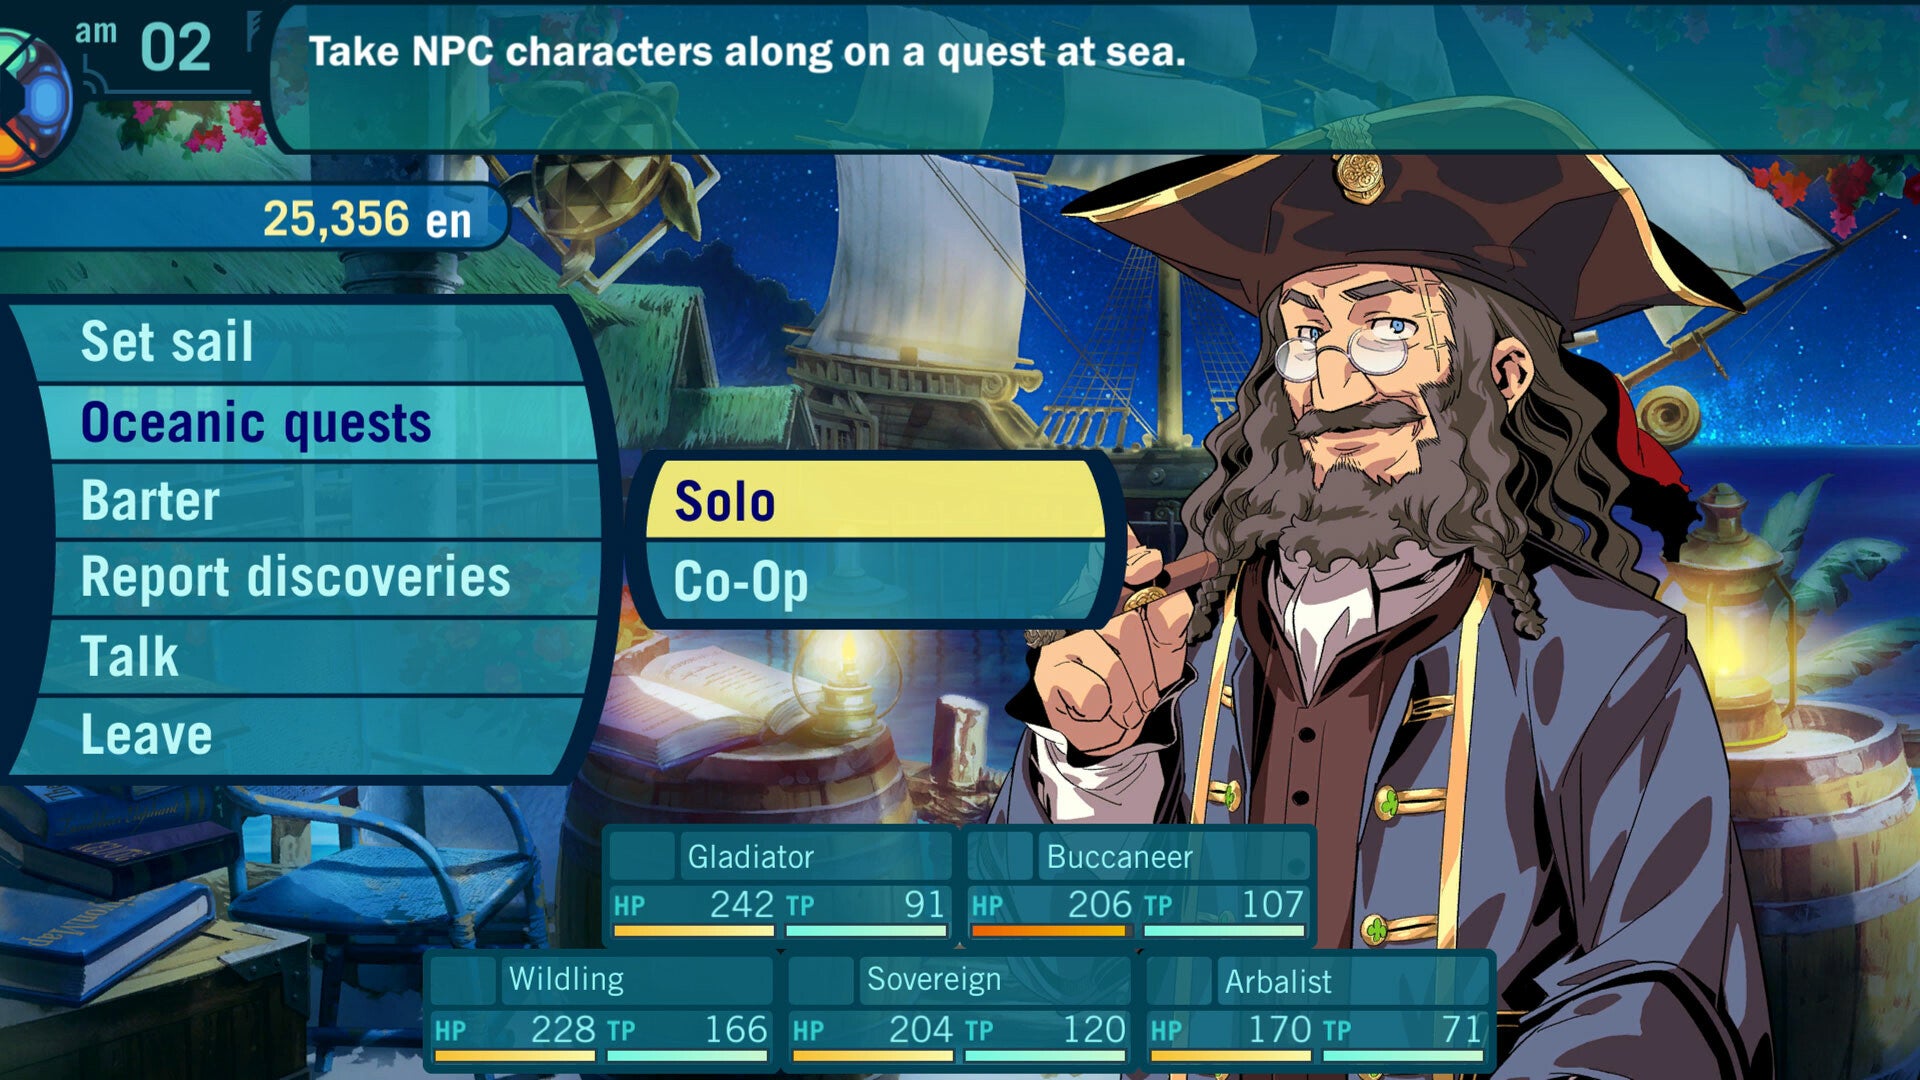 A UI screen featuring a middle aged pirate with glasses in Etrian Odyssey 3.